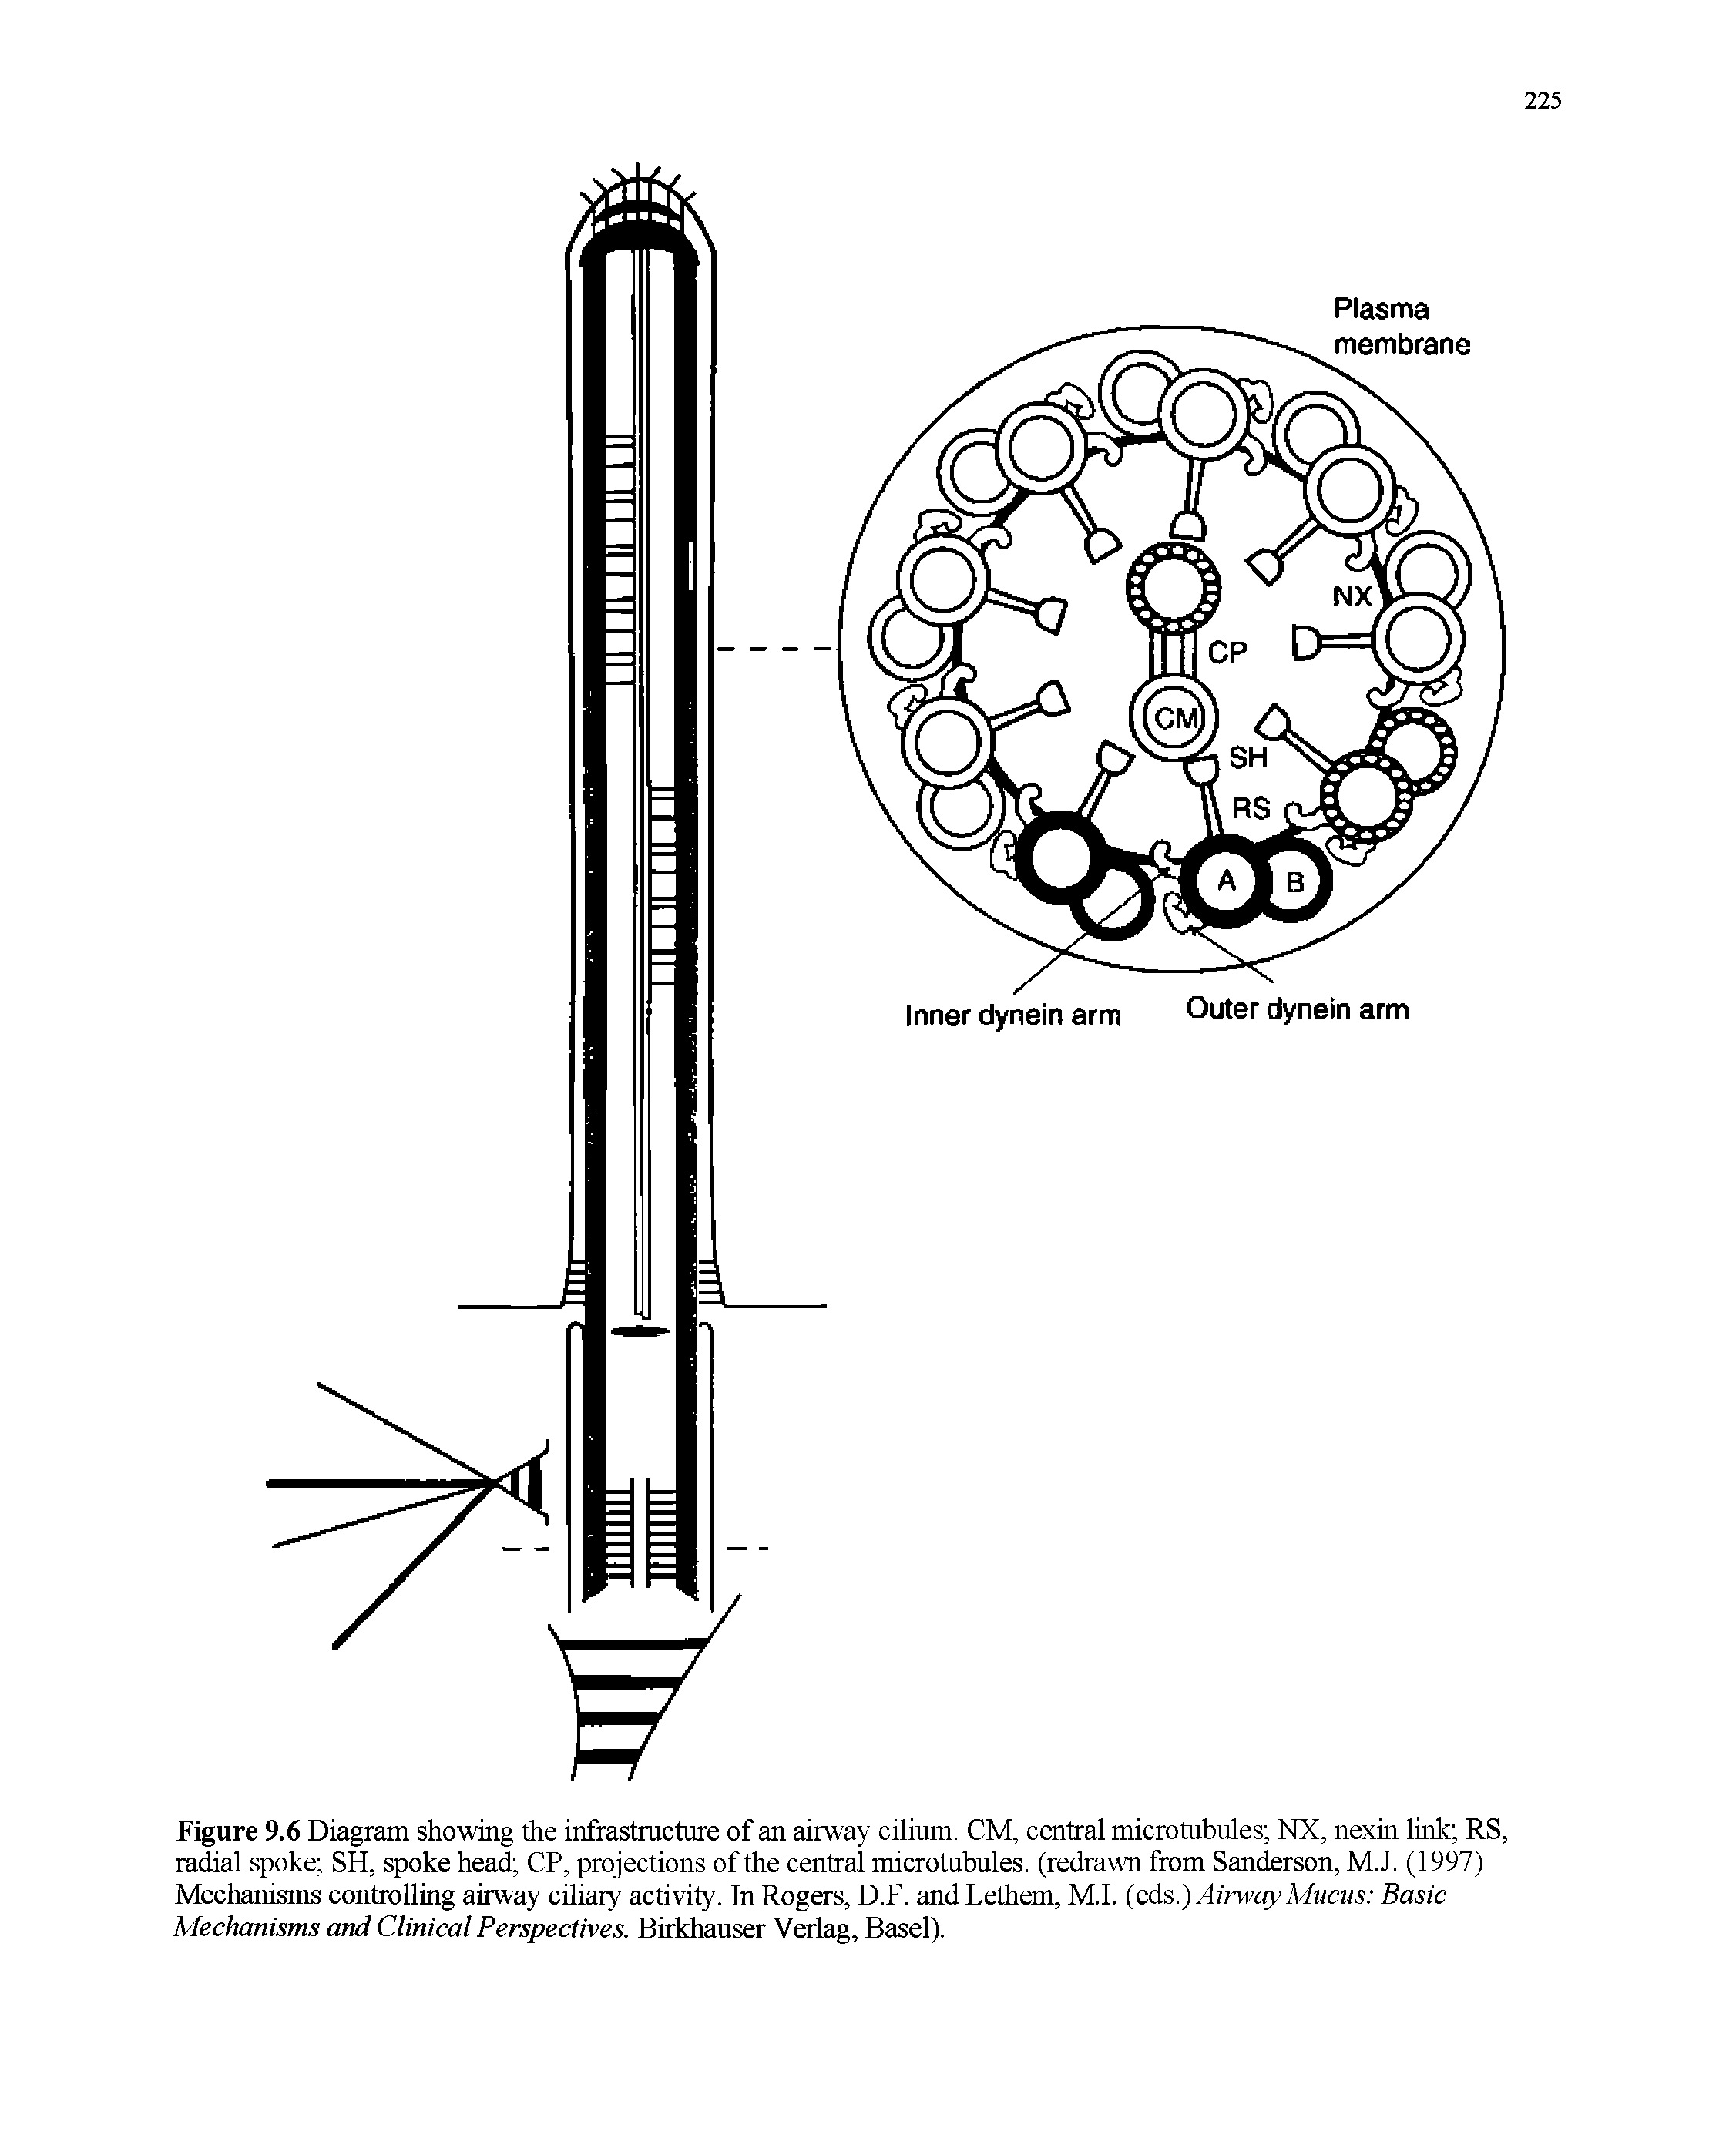 Figure 9.6 Diagram showing the infrastructure of an airway cilium. CM, central microtubules NX, nexin link RS, radial spoke SH, spoke head CP, projections of the central microtubules, (redrawn from Sanderson, M.J. (1997) Mechanisms controlling airway ciliary activity. In Rogers, D.F. andLethem, M.I. (eds.) Airway Mucus Basic Mechanisms and Clinical Perspectives. Birkhauser Verlag, Basel).